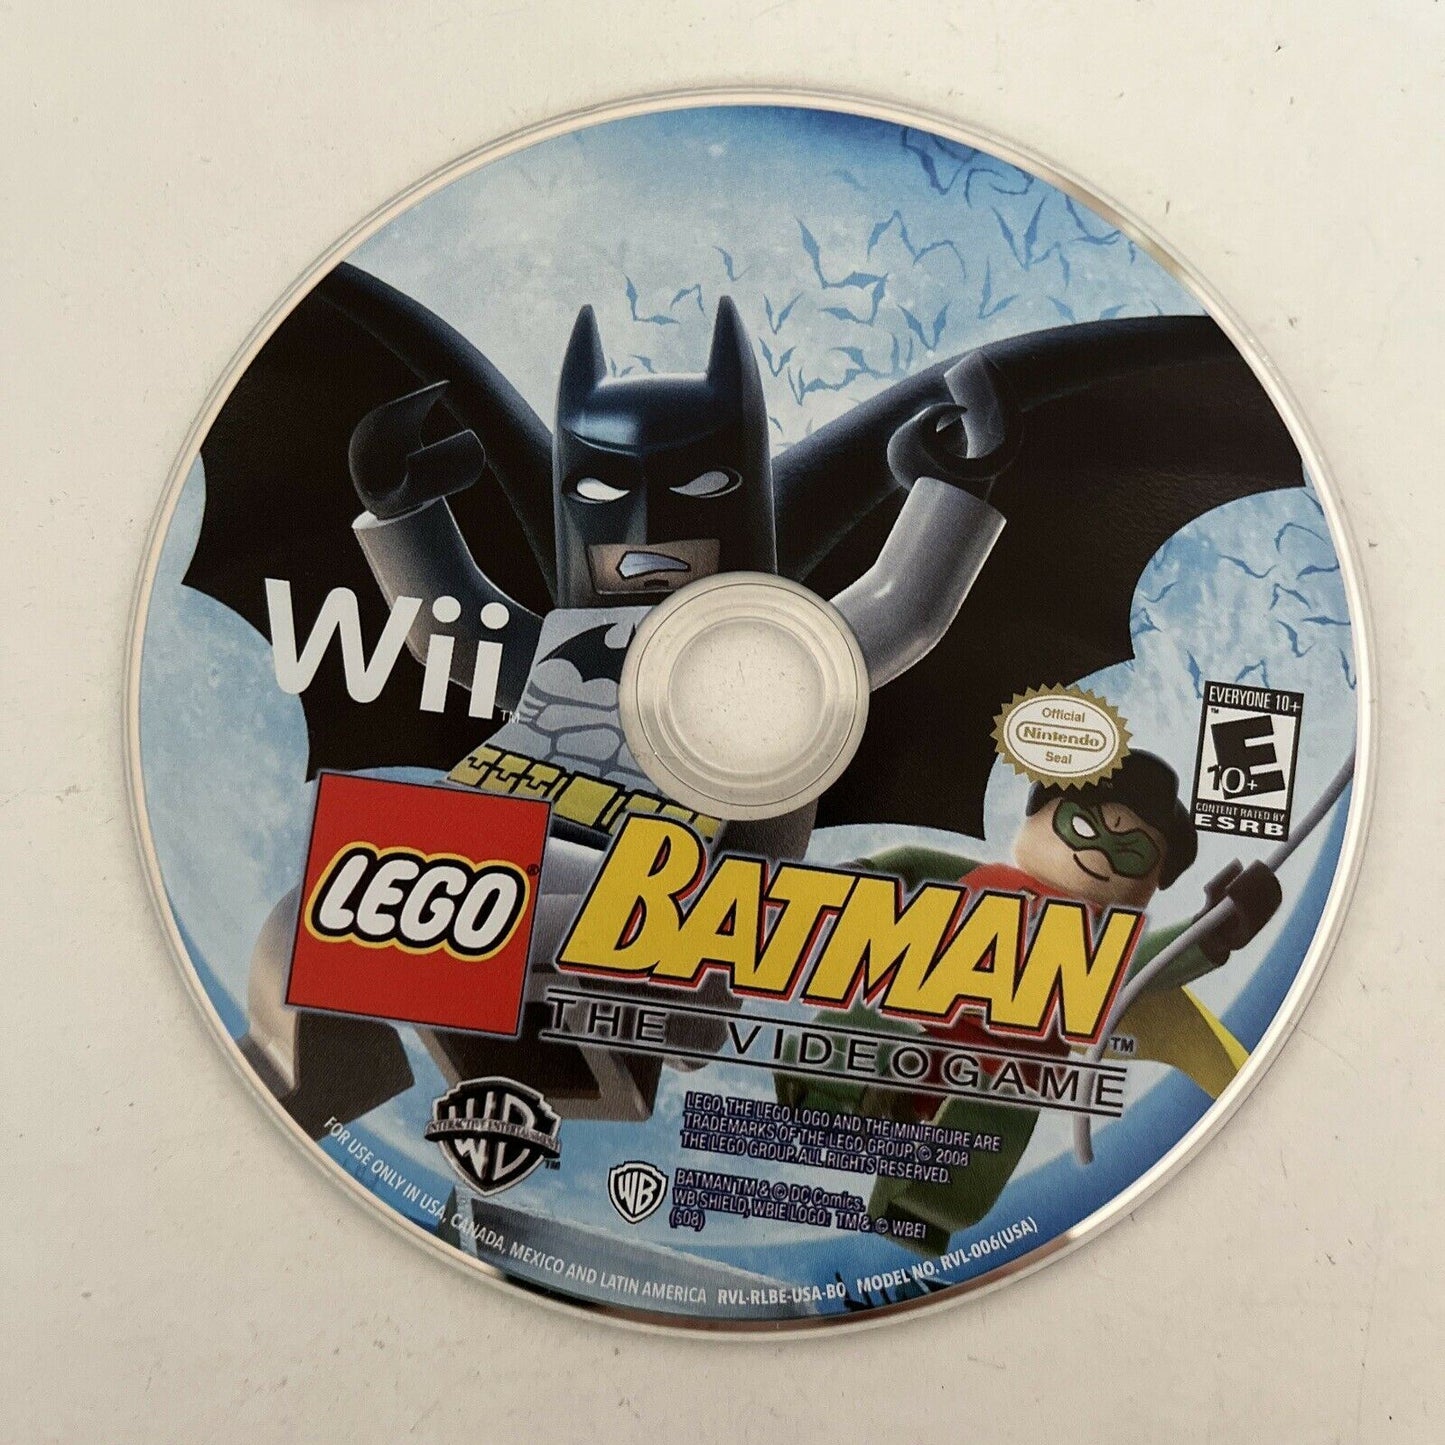 LEGO Batman: The Video Game - Nintendo Wii PAL Game with Manual